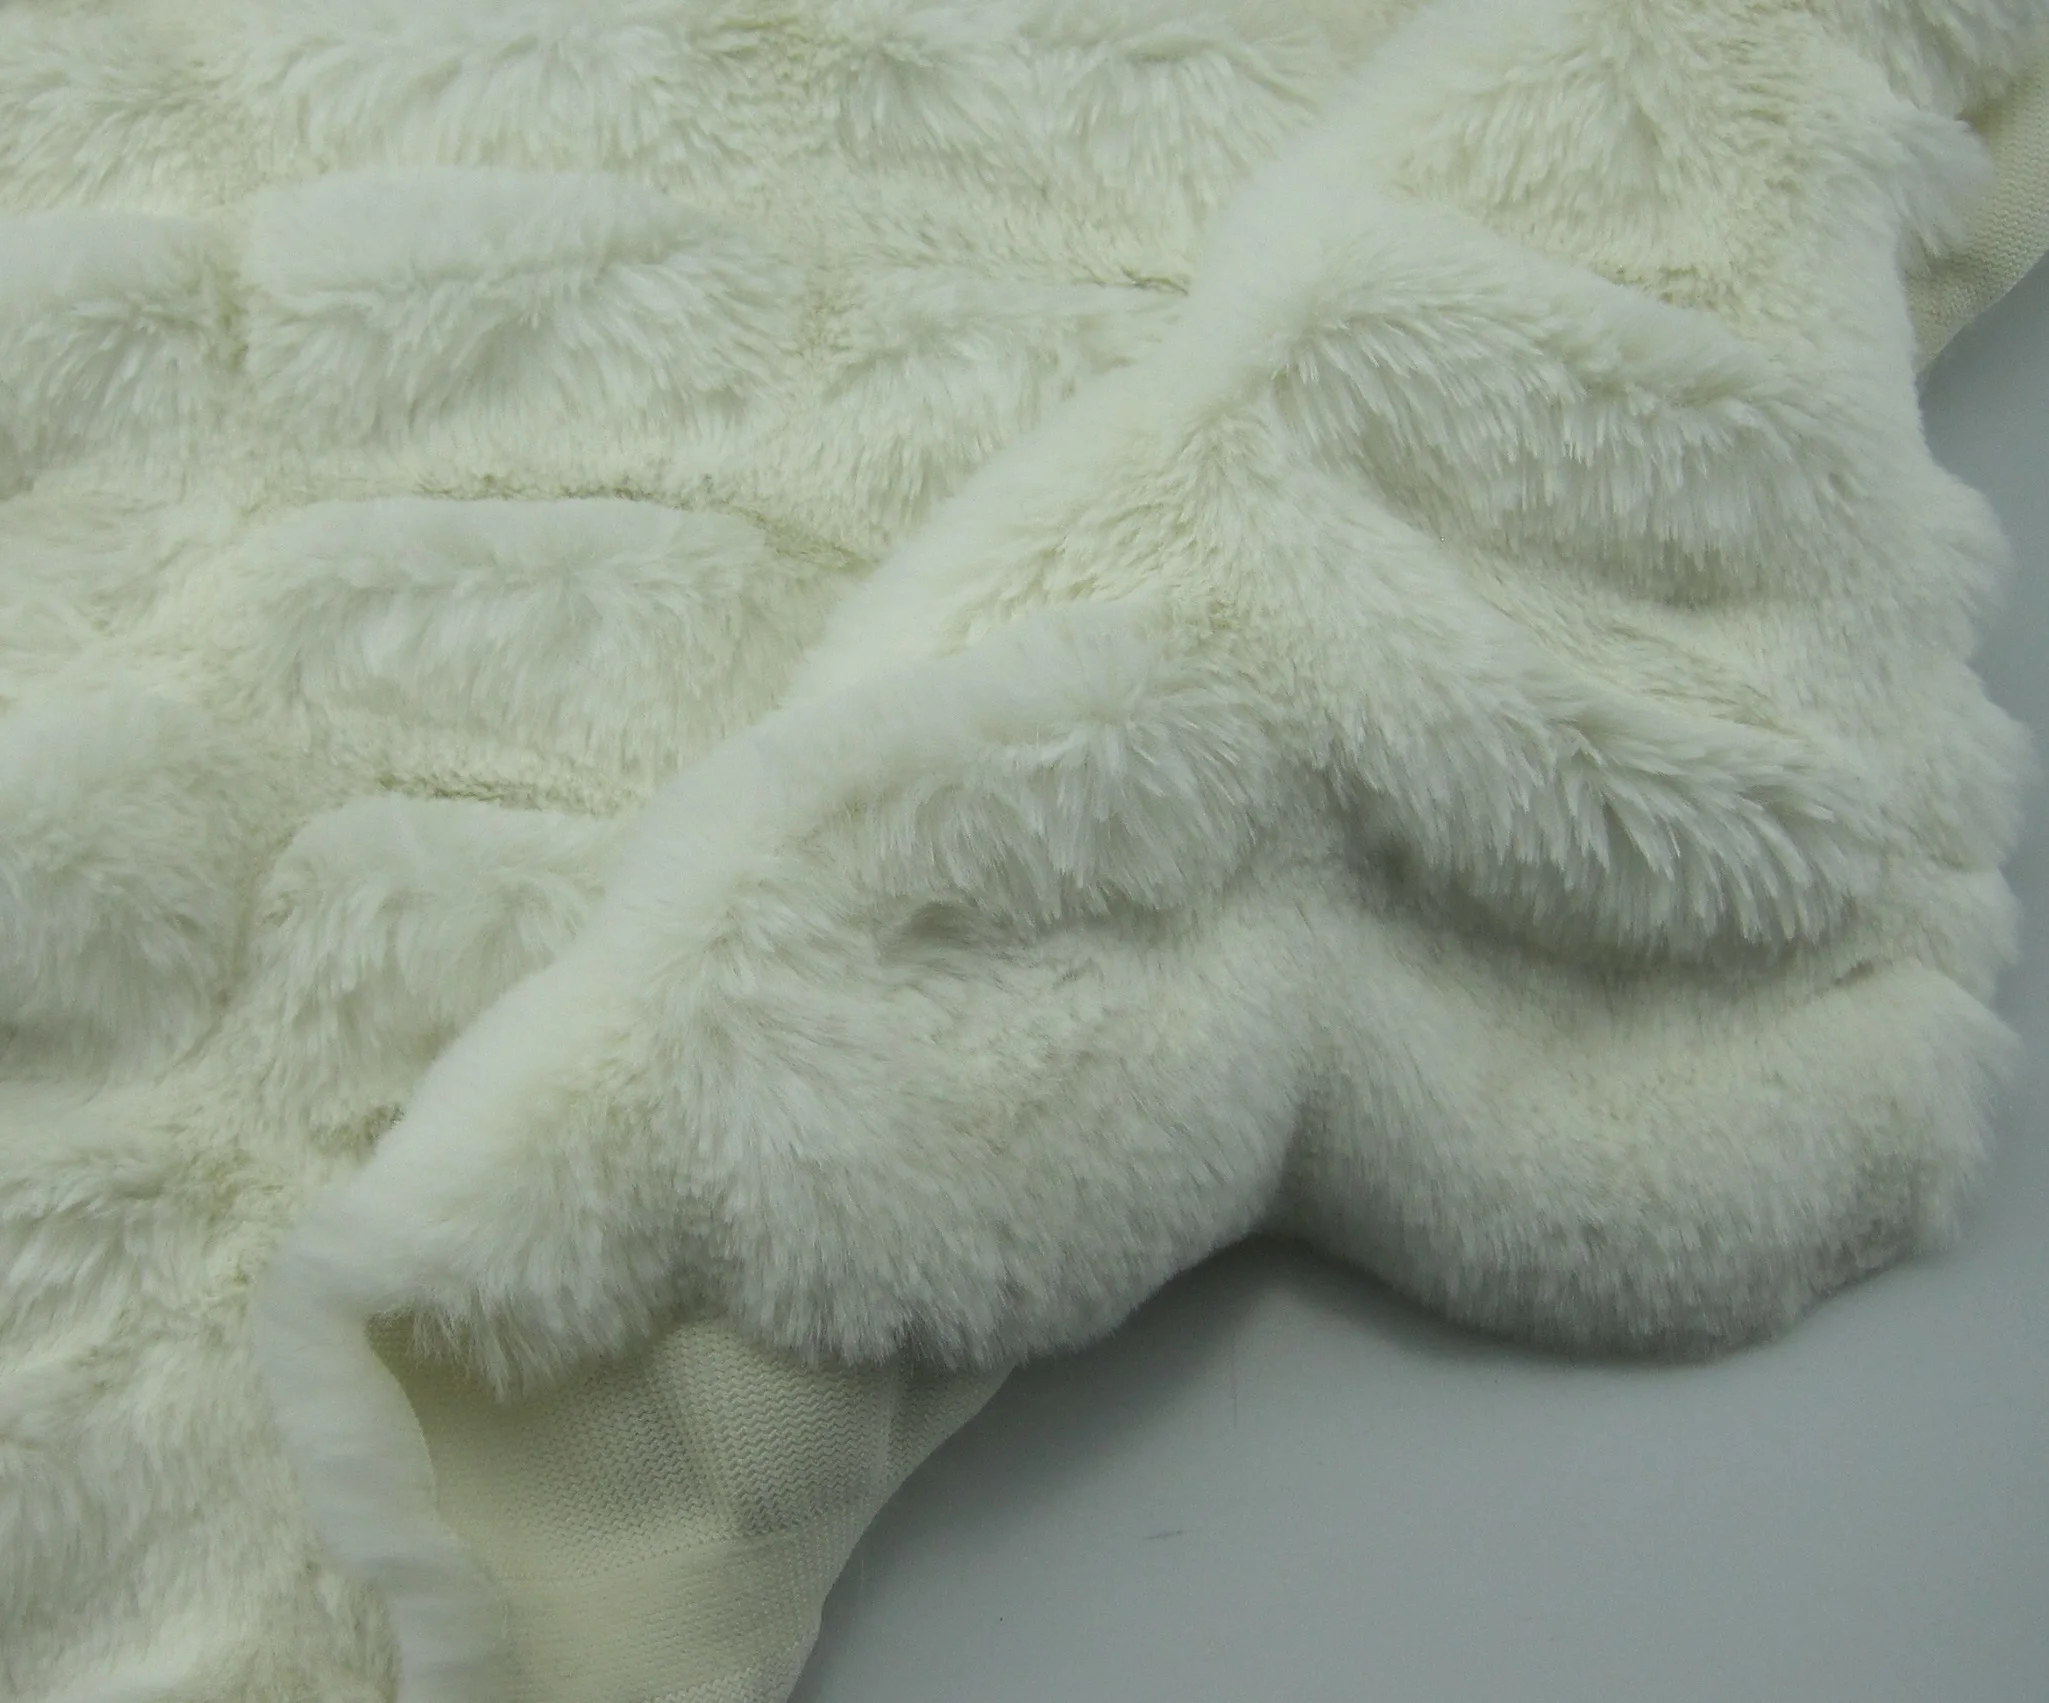 Spandex Stretch Fabric Rabbit Faux Fur For Garment Hometextiles Buy Spandex Stretch Fabric Rabbit Faux Fur Super Silky Soft Rabbit Faux Fur High Quality Rabbit Faux Fur Product On Alibaba Com